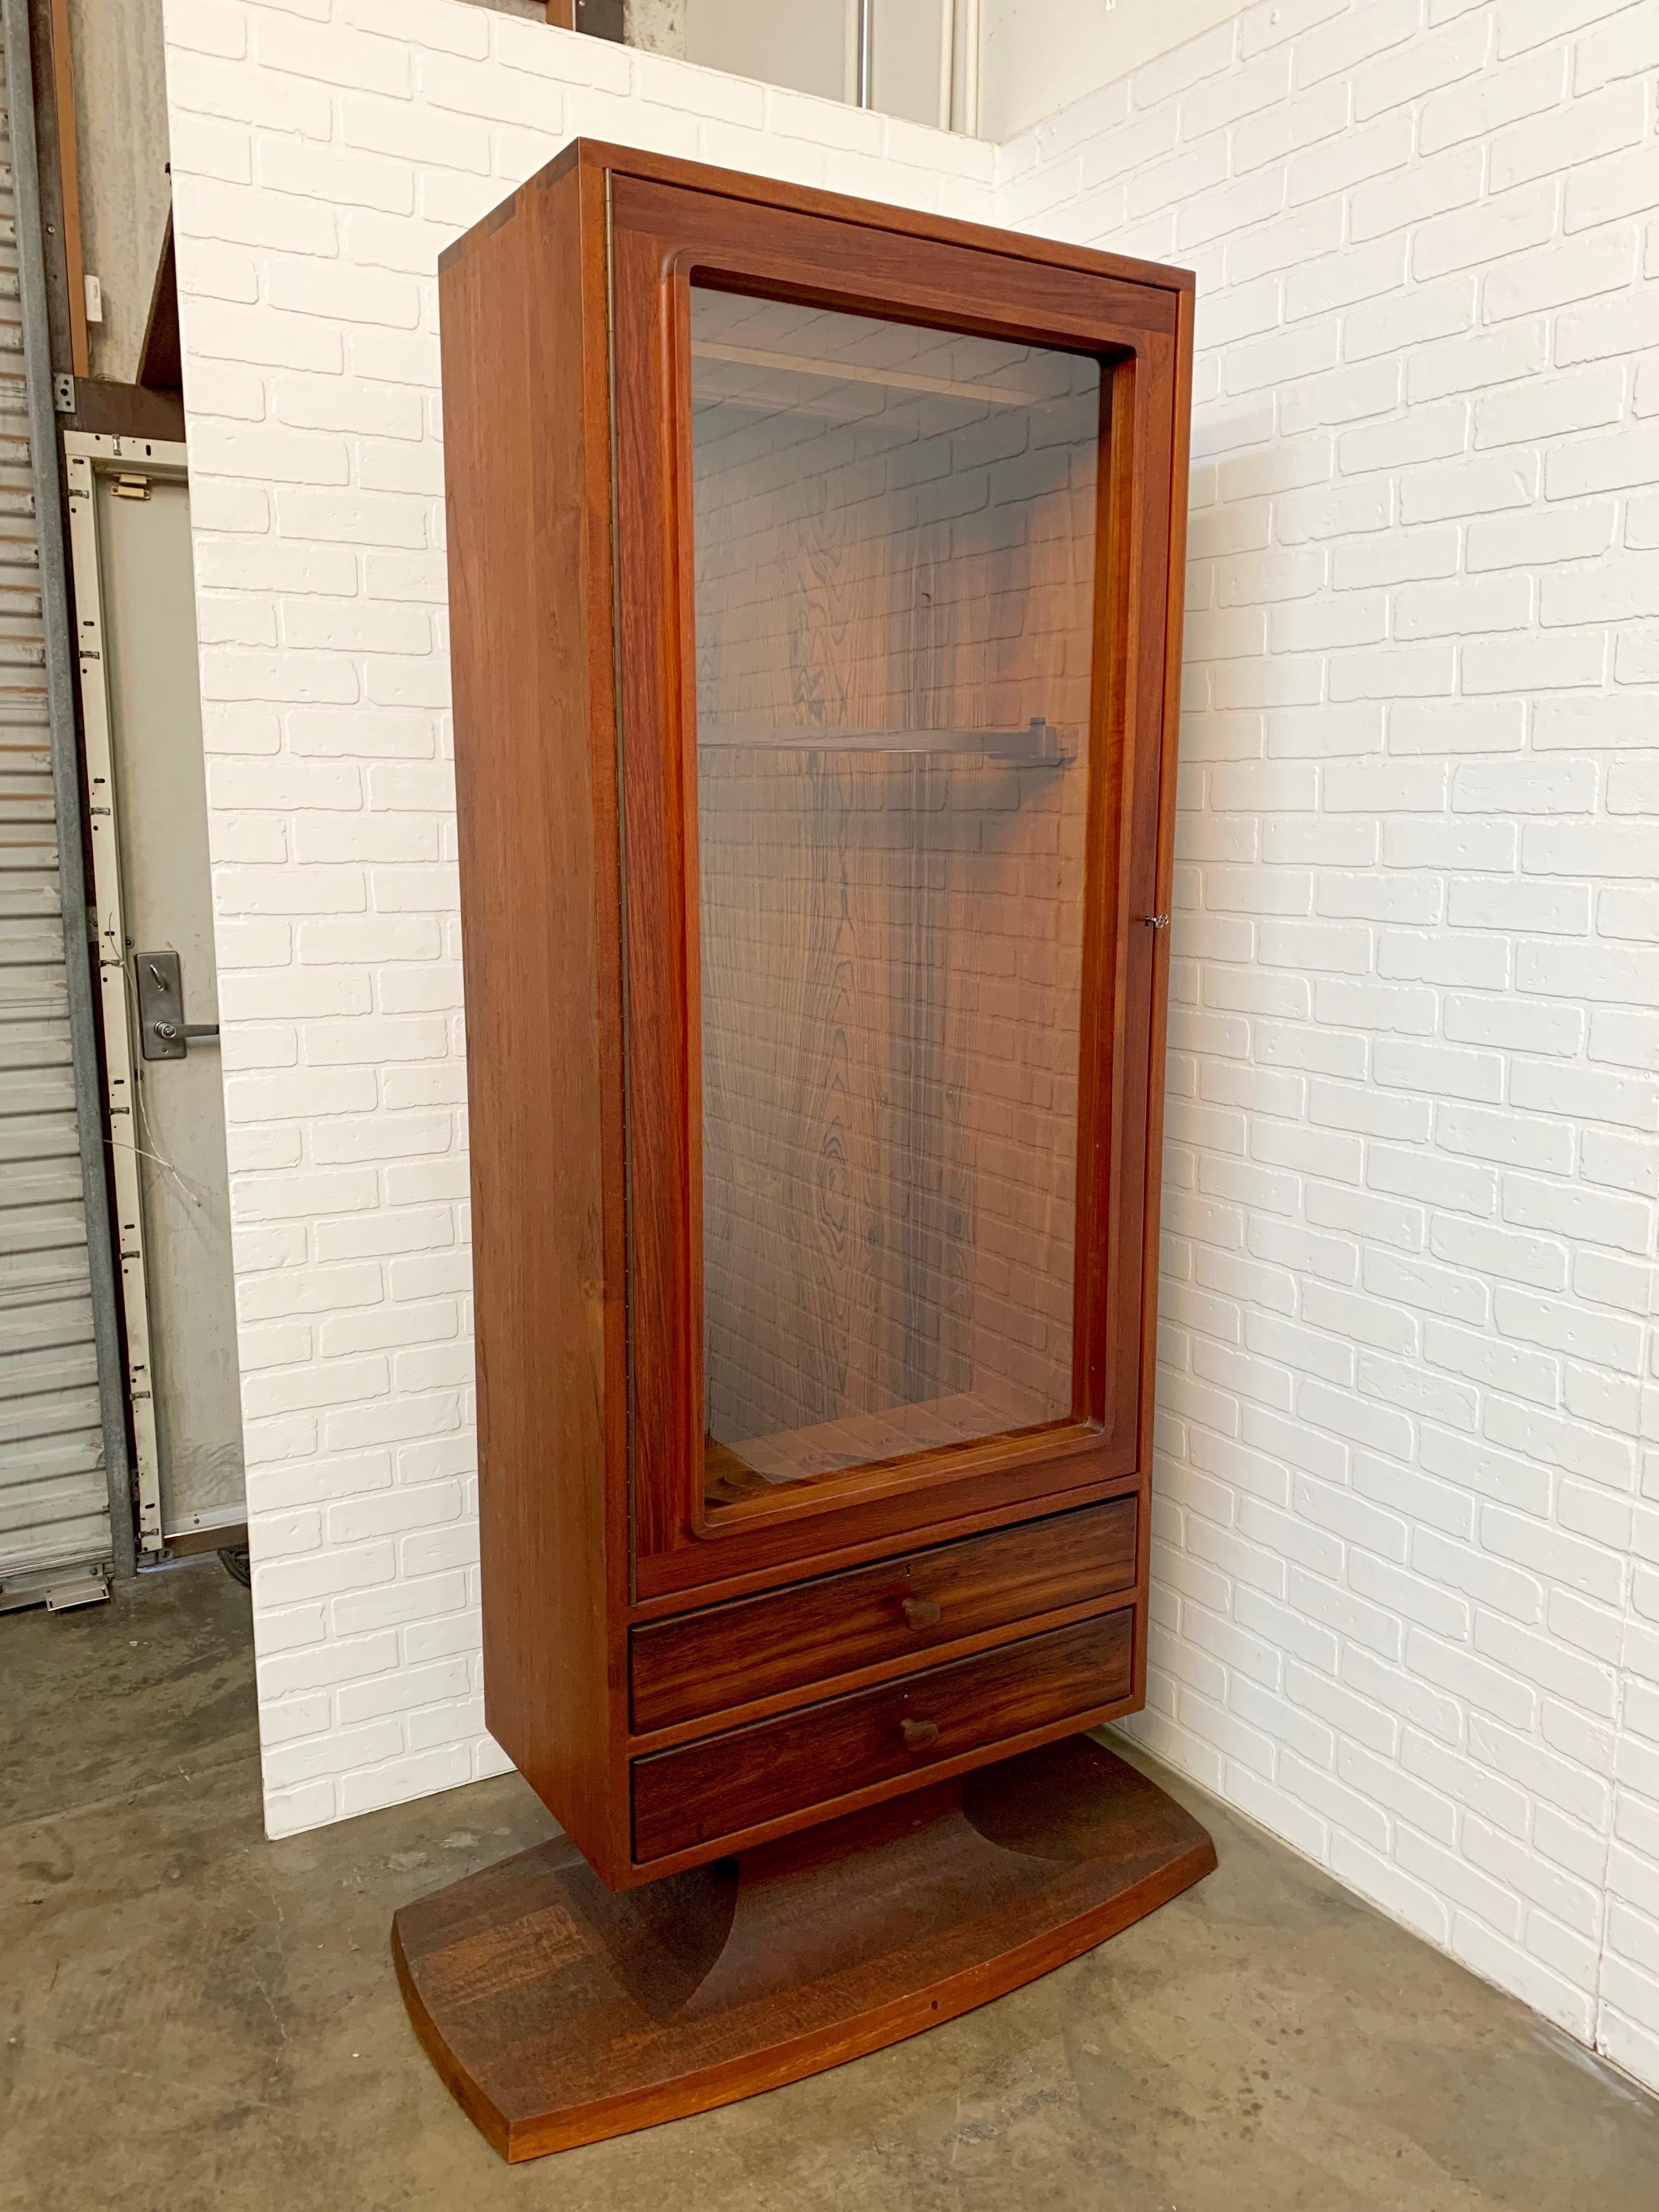 Sculpted walnut pedestal rifle / gun / trophy cabinet with rosewood, maple accents. Locking glass door for security, signed on base
Expert joinery by master craftsman John Nyquist
Case dimensions: 30 L x 16.5 D
Base dimensions: 42